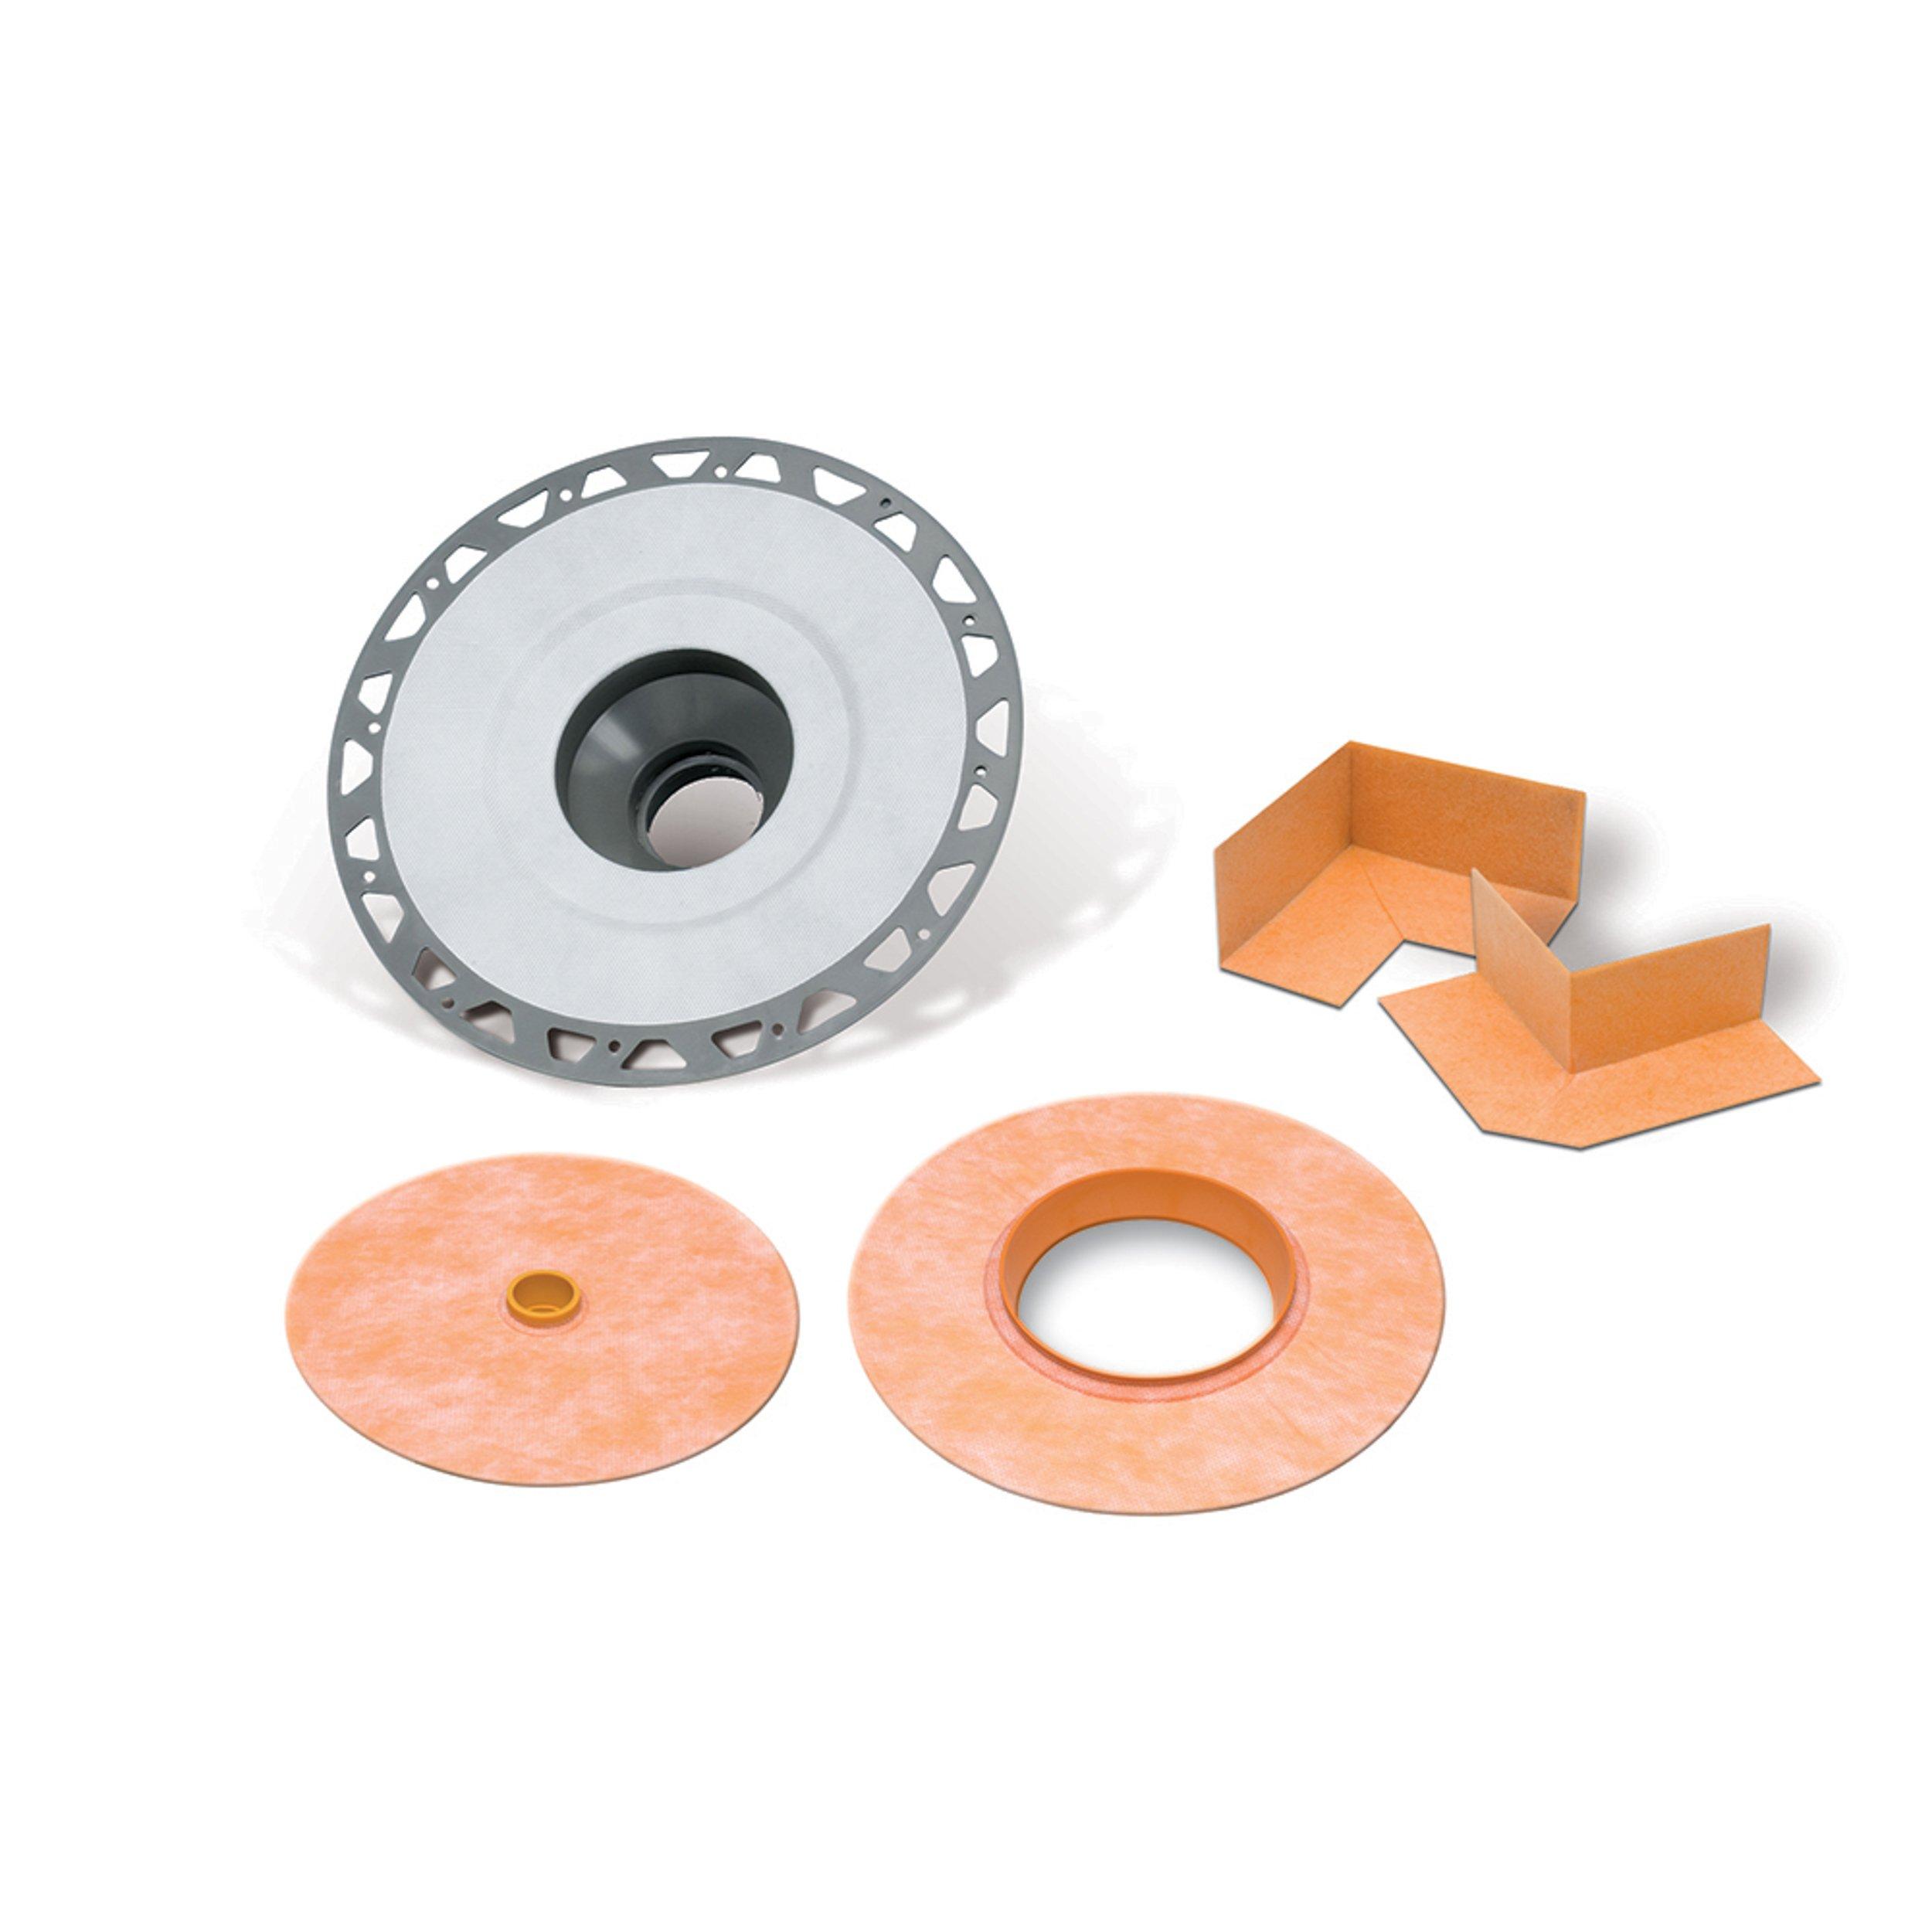 Schluter Kerdi-Drain Flange PVC 2in. With Seals and Corners